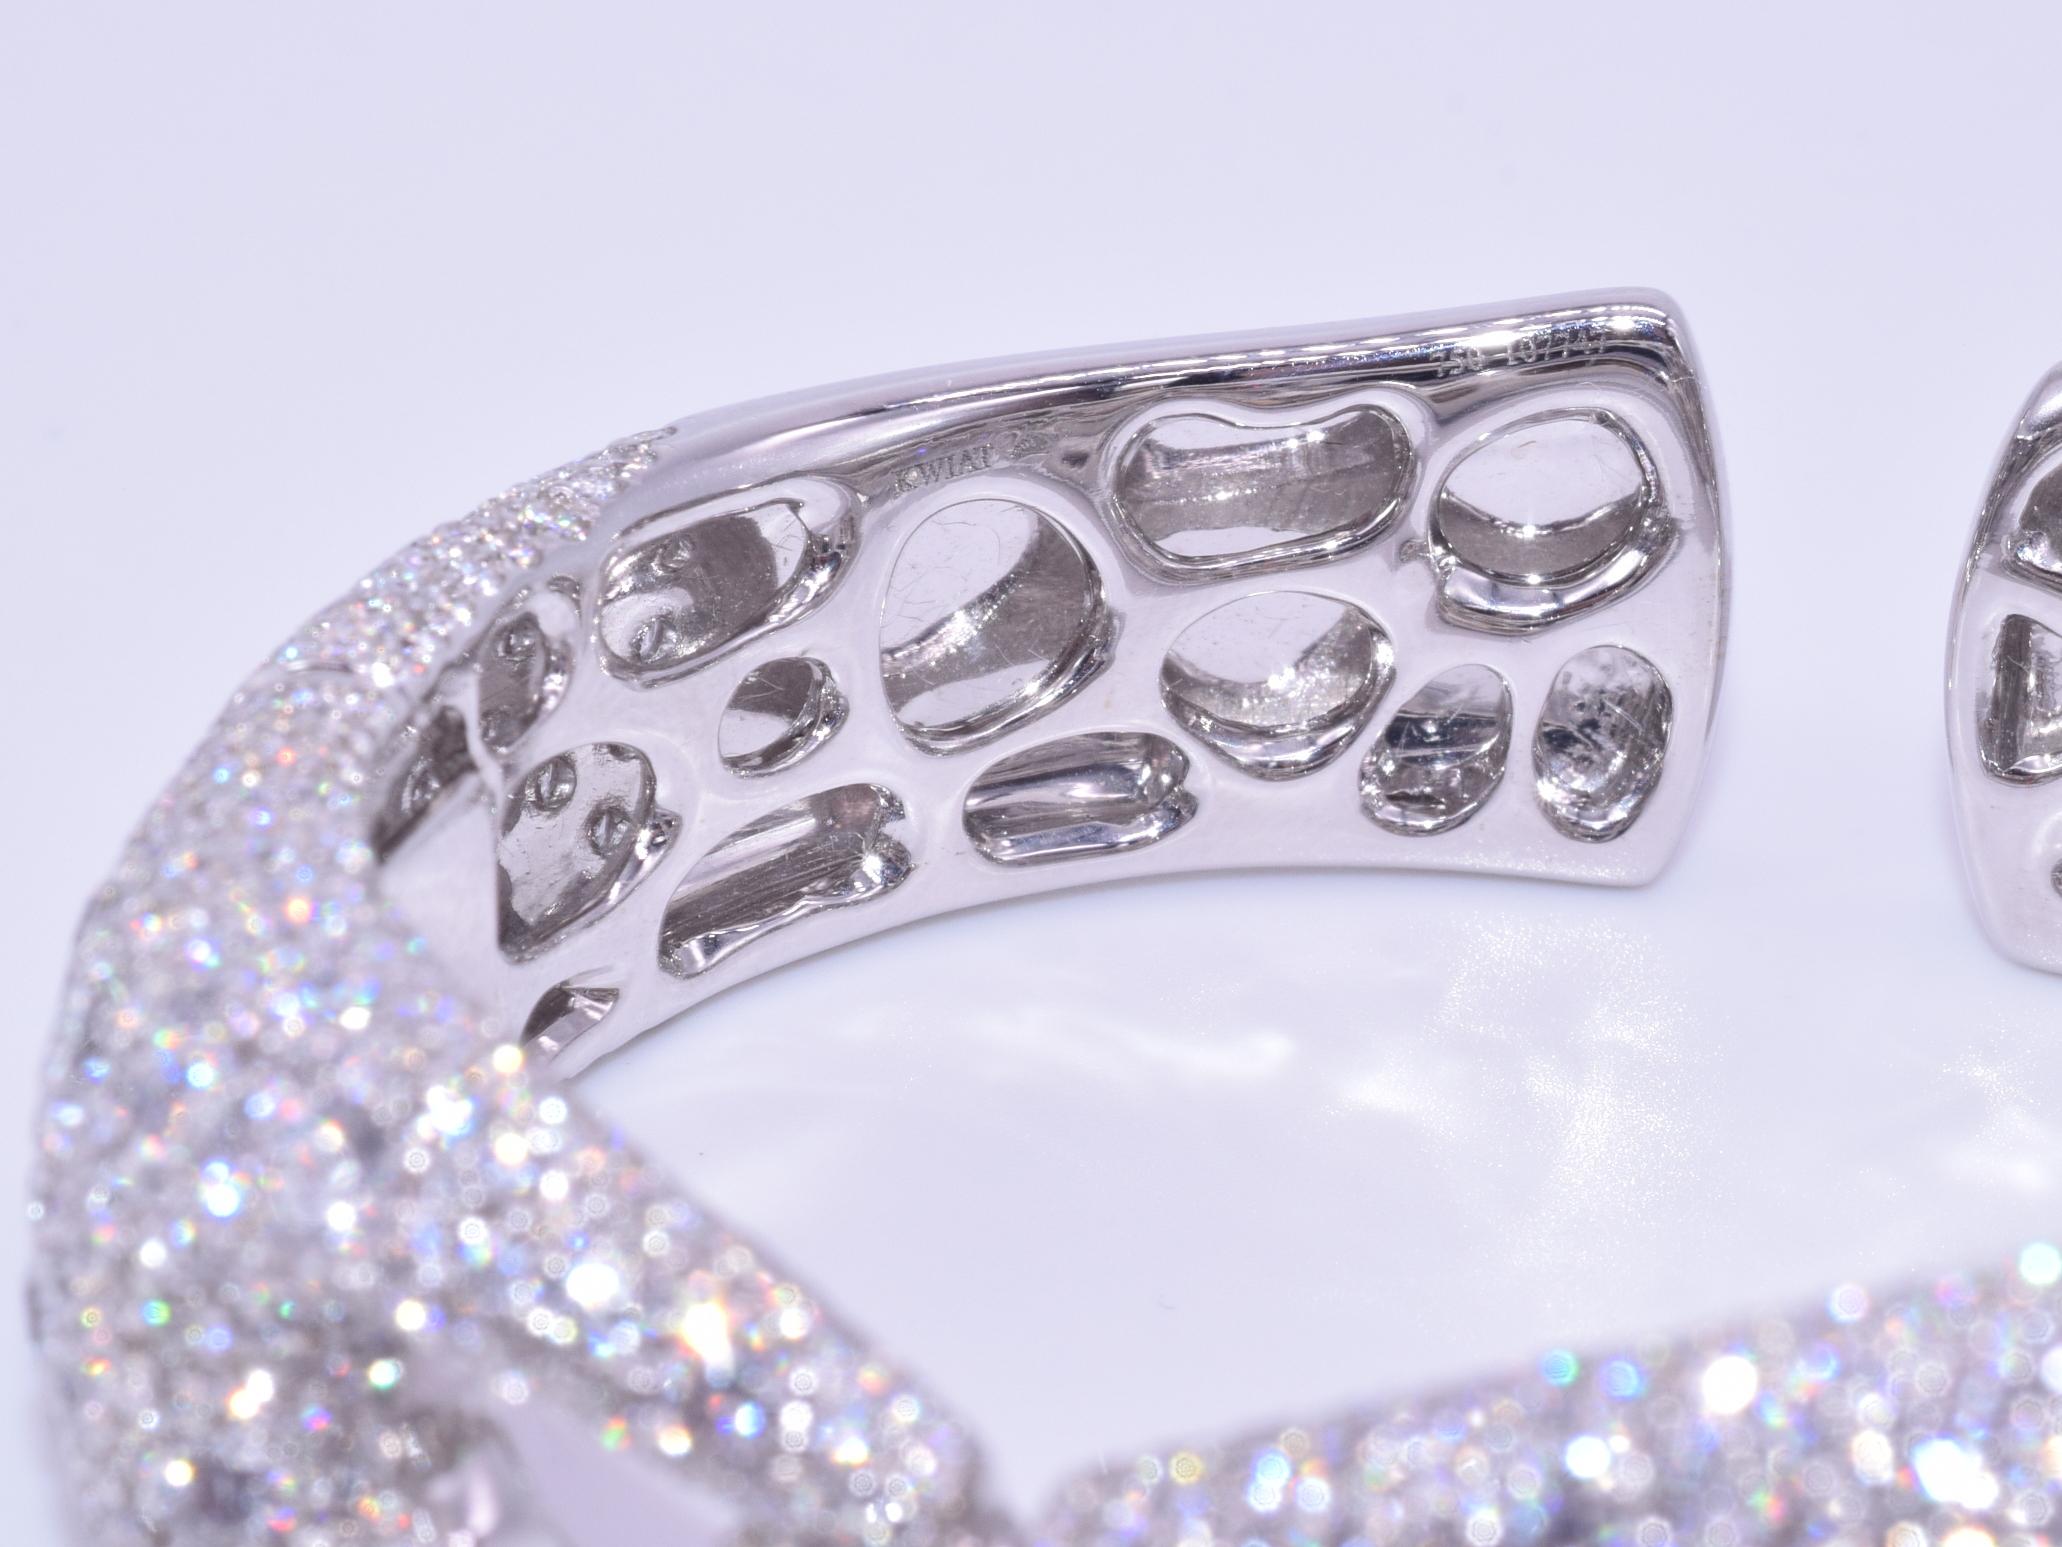 18k White Gold Diamond Cuff, Signed Kwiat

This diamond cuff is from the Kwiat Madison Avenue Collection with 1,201 Round Brilliant Diamonds totaling 24.89 carats, FG/VS2-SI1 mounted in 18k white gold.  The original retail was $119,500

Since 1907,